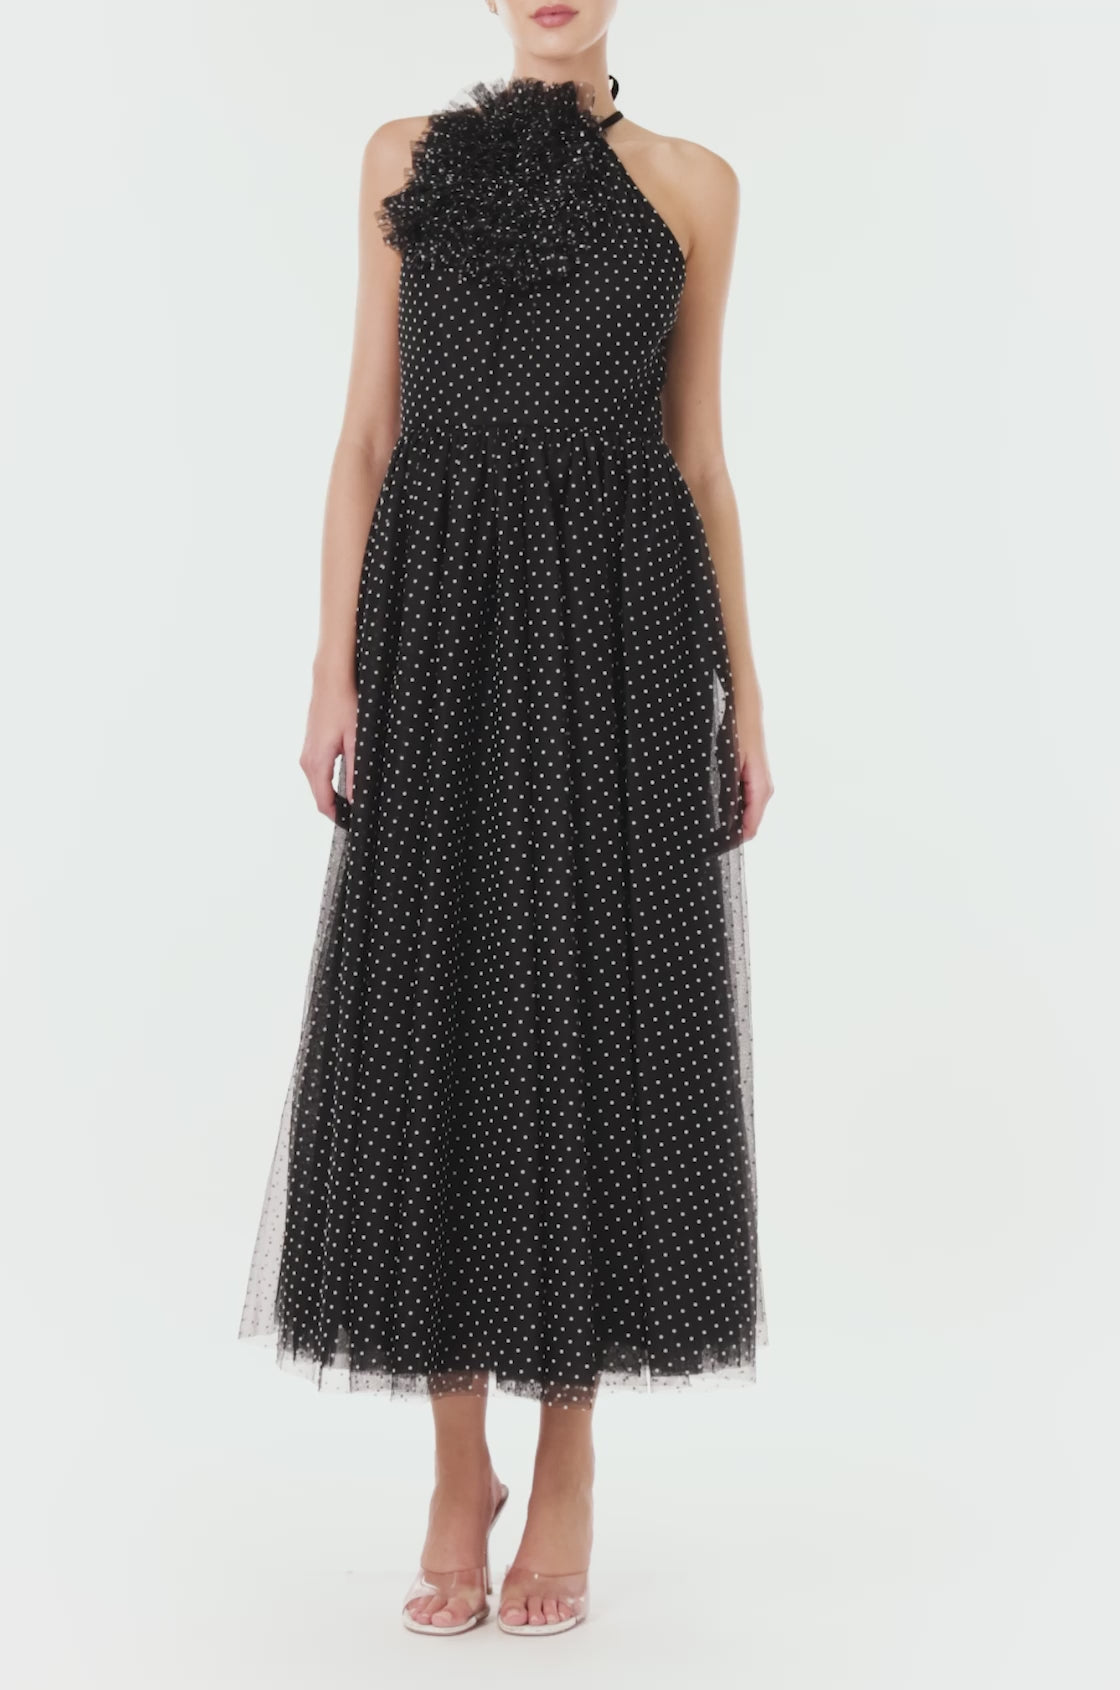 ML Monique Lhuillier midi length halter dress with puff accent at neckline in black and white dotted tulle fabric.